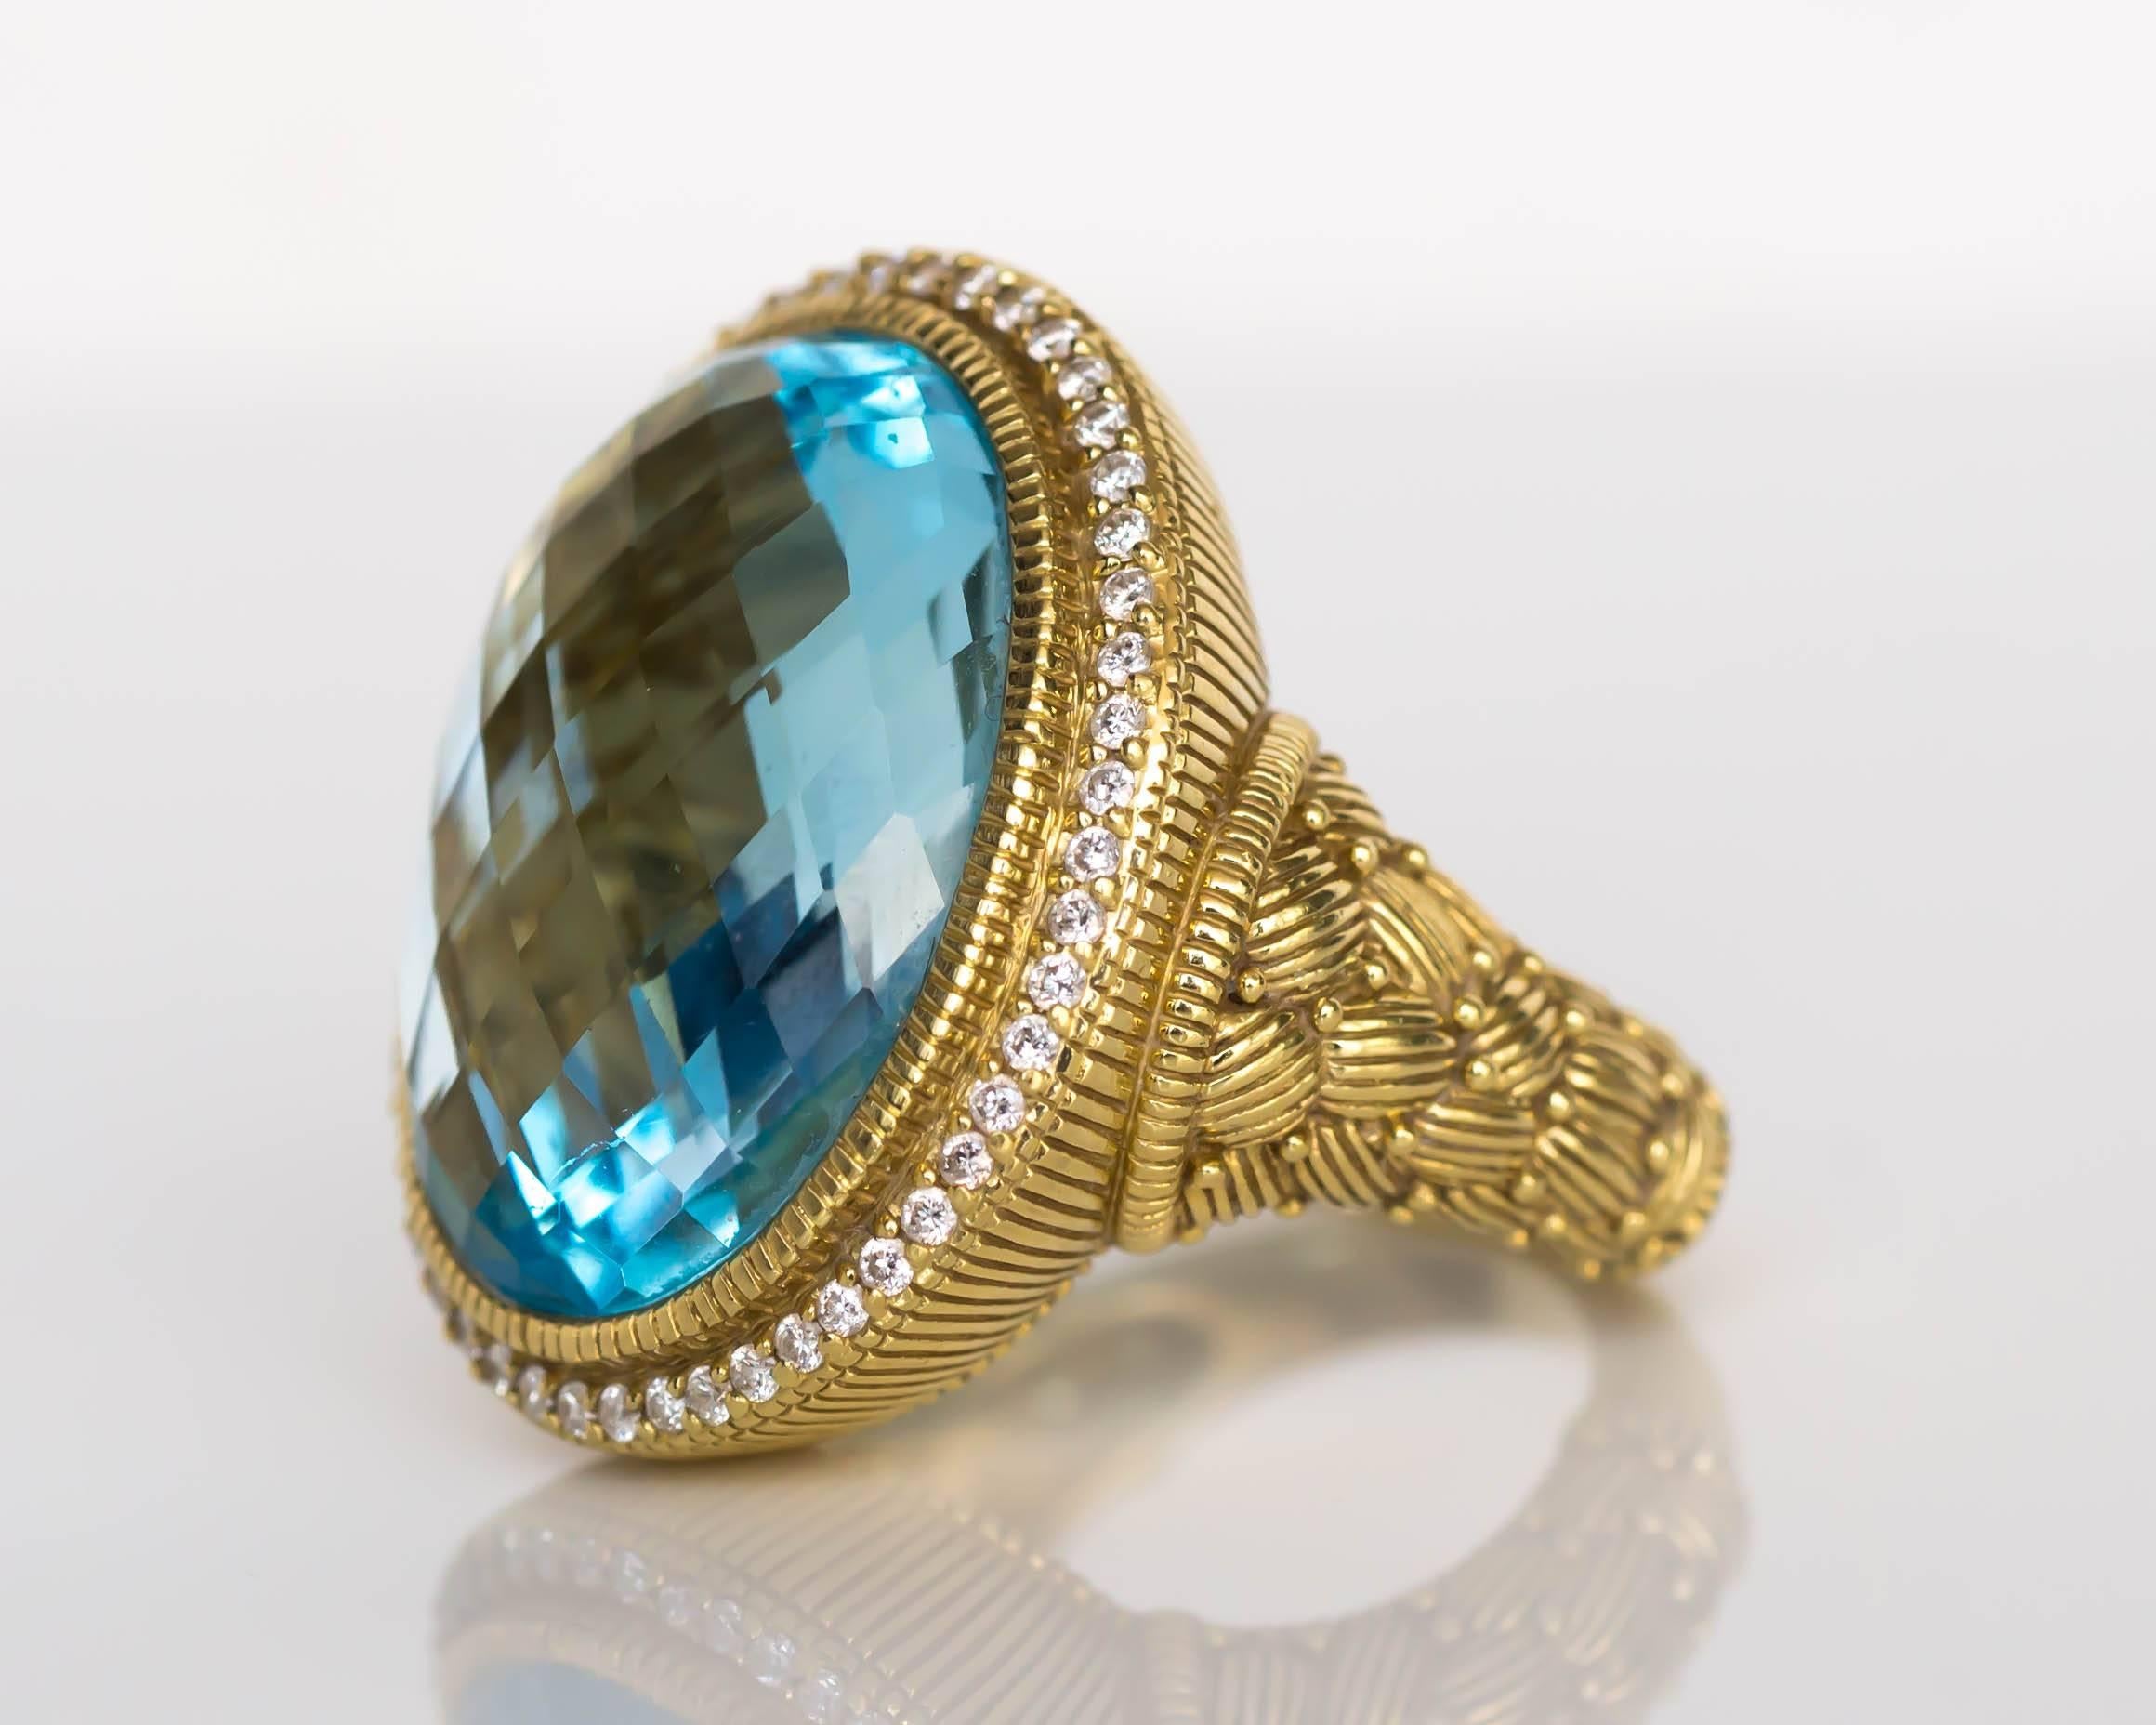 Item Details: 
Ring Size: 7
Metal Type: 18 Karat Yellow Gold
Weight: 18.6 grams

Color Stone Details: 
Type: London Blue Topaz (Checkerboard faceting)
Carat WeighT: 10 carat

Diamond Details:
Carat Weight: .40 carat, total weight
Color: D-E
Clarity: